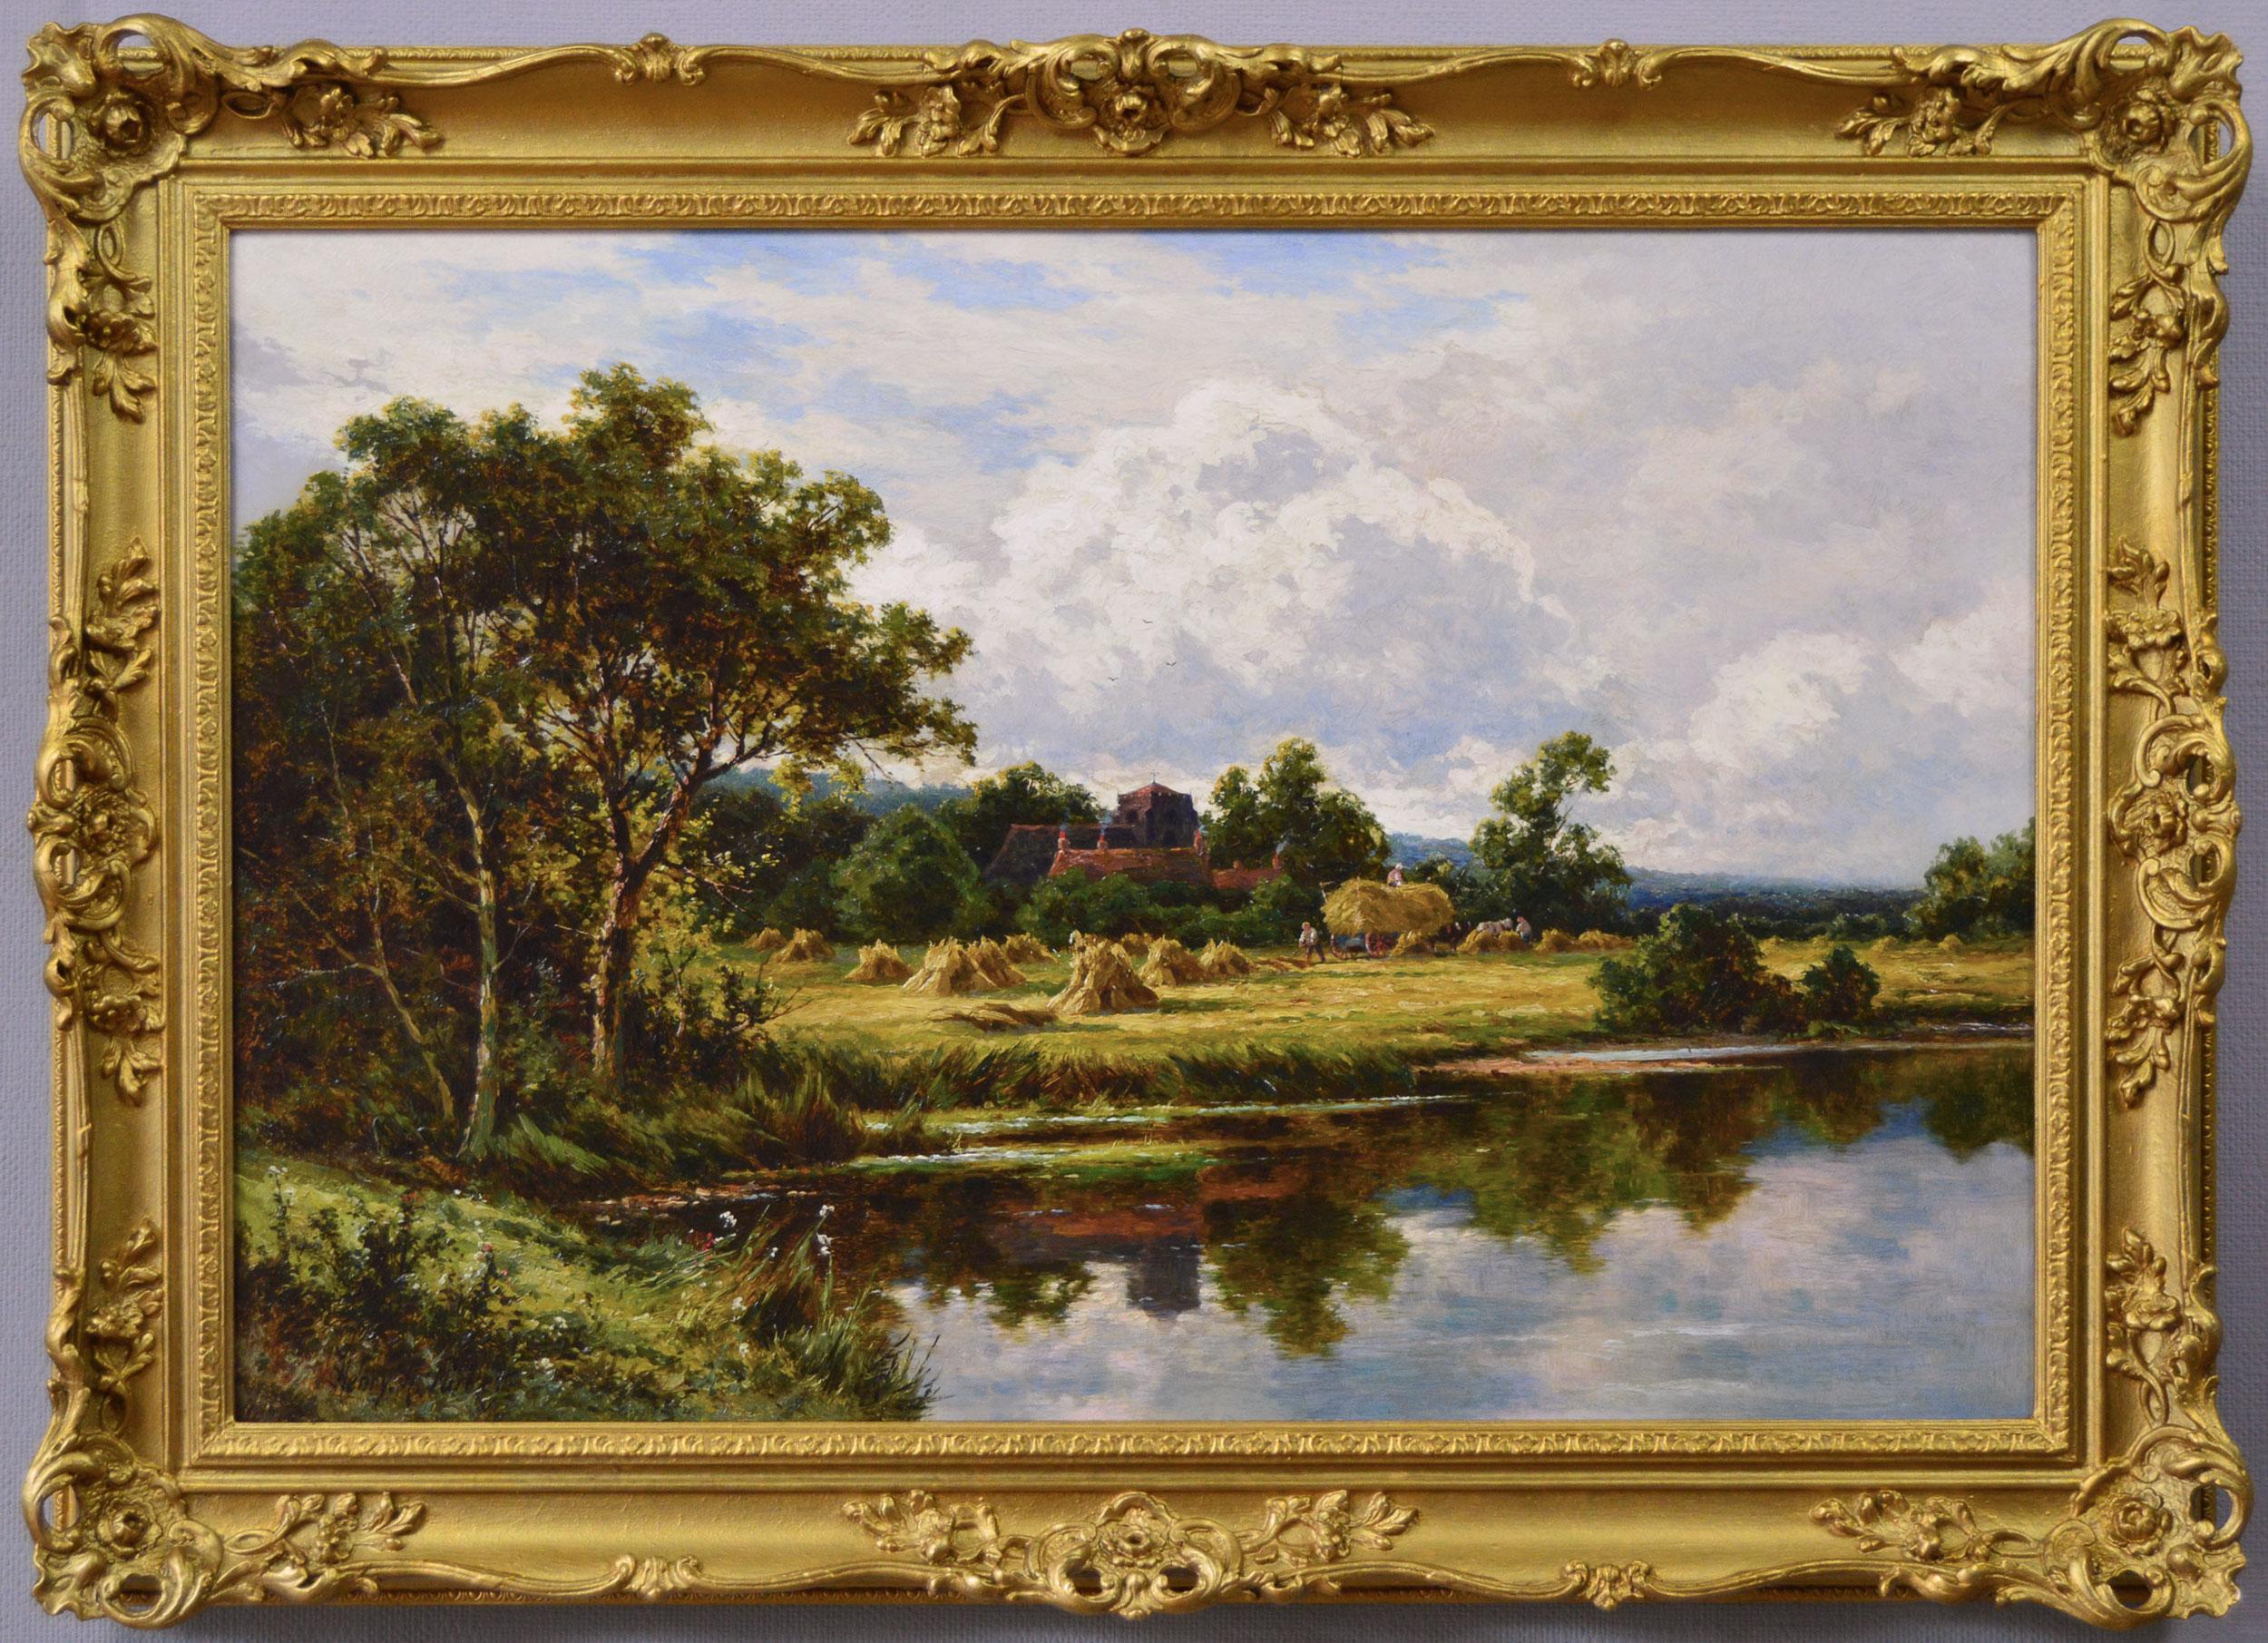 Henry H. Parker Landscape Painting - 19th Century landscape oil painting of figures harvesting next to a river